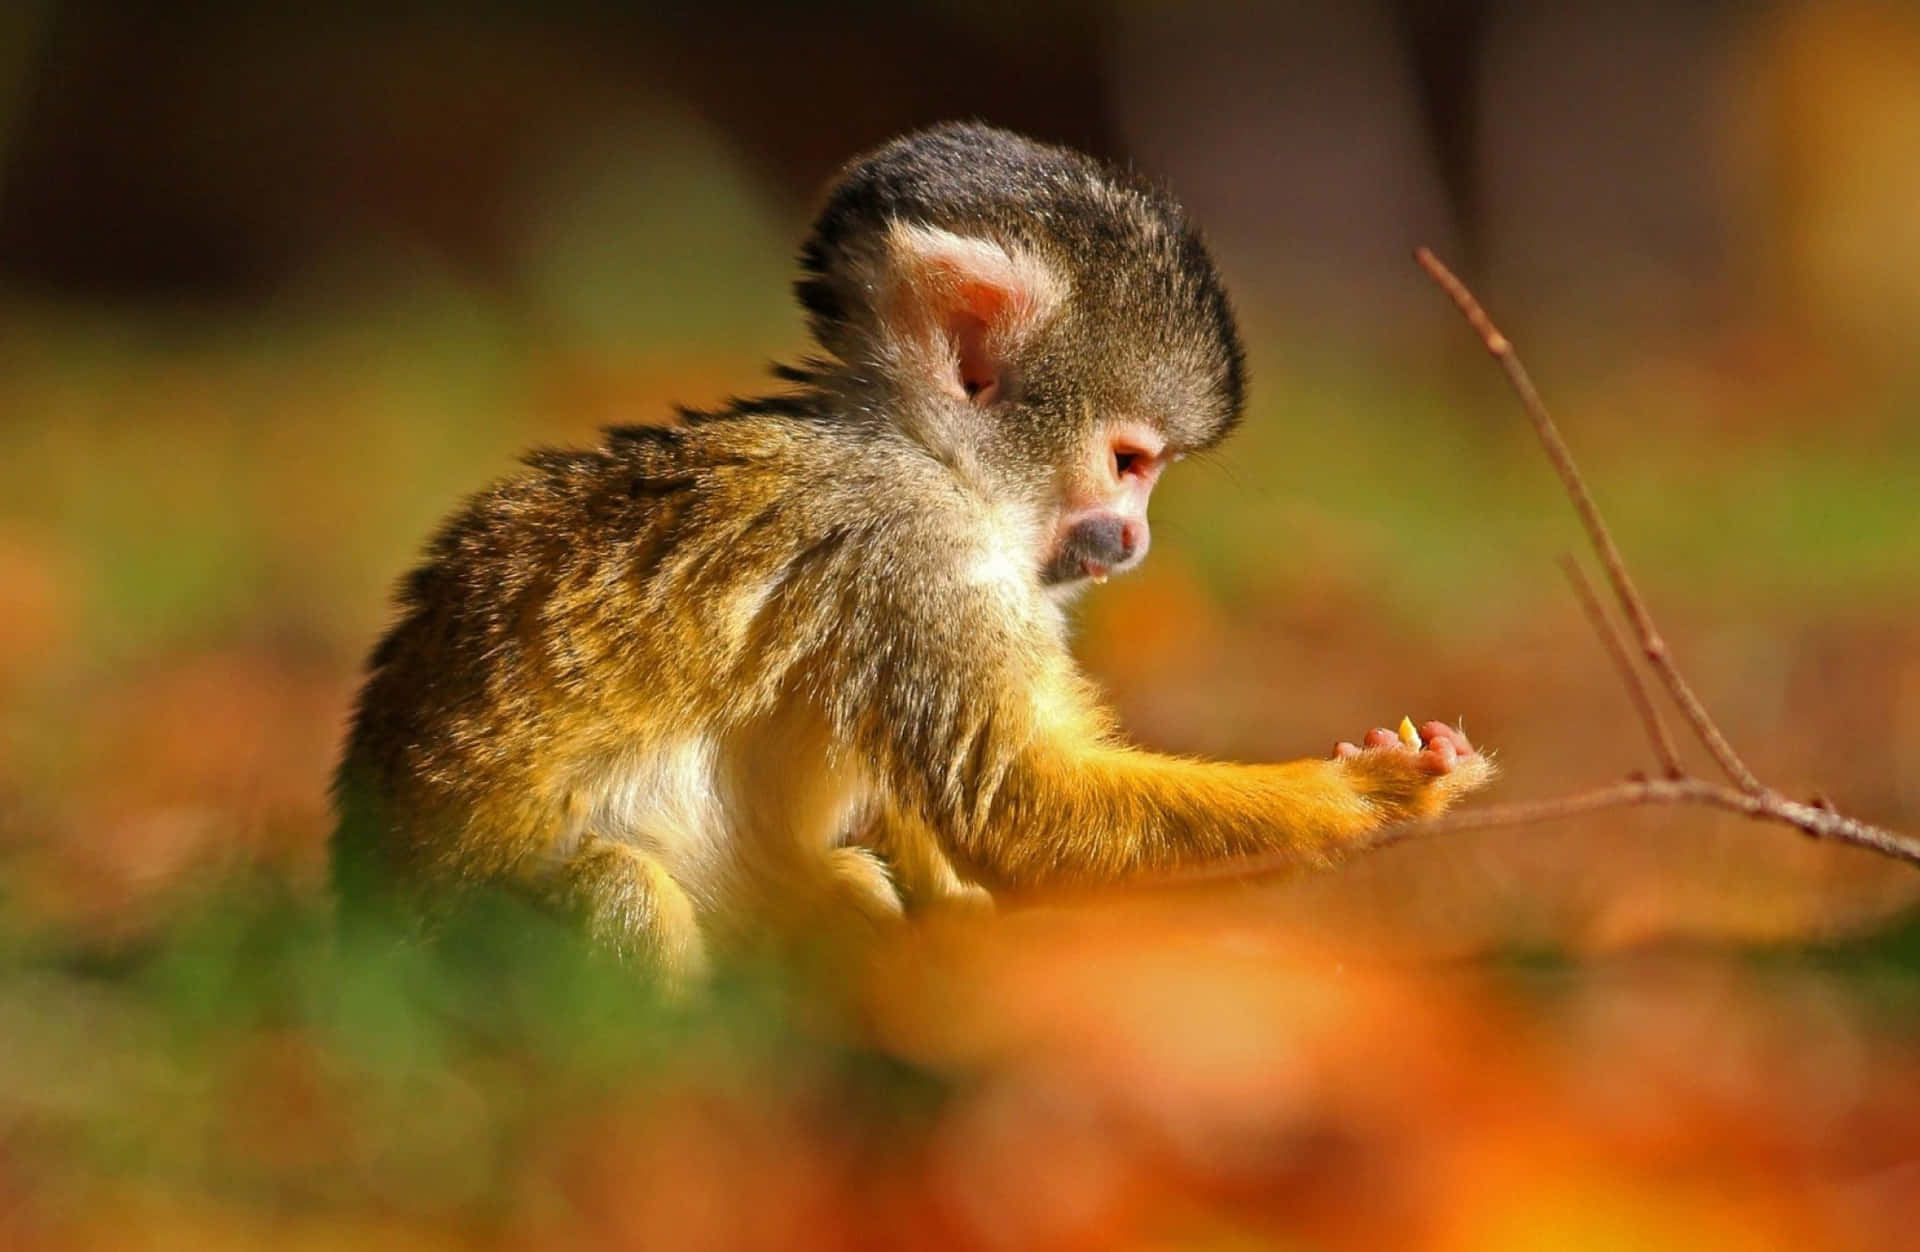 Look at this adorable little monkey